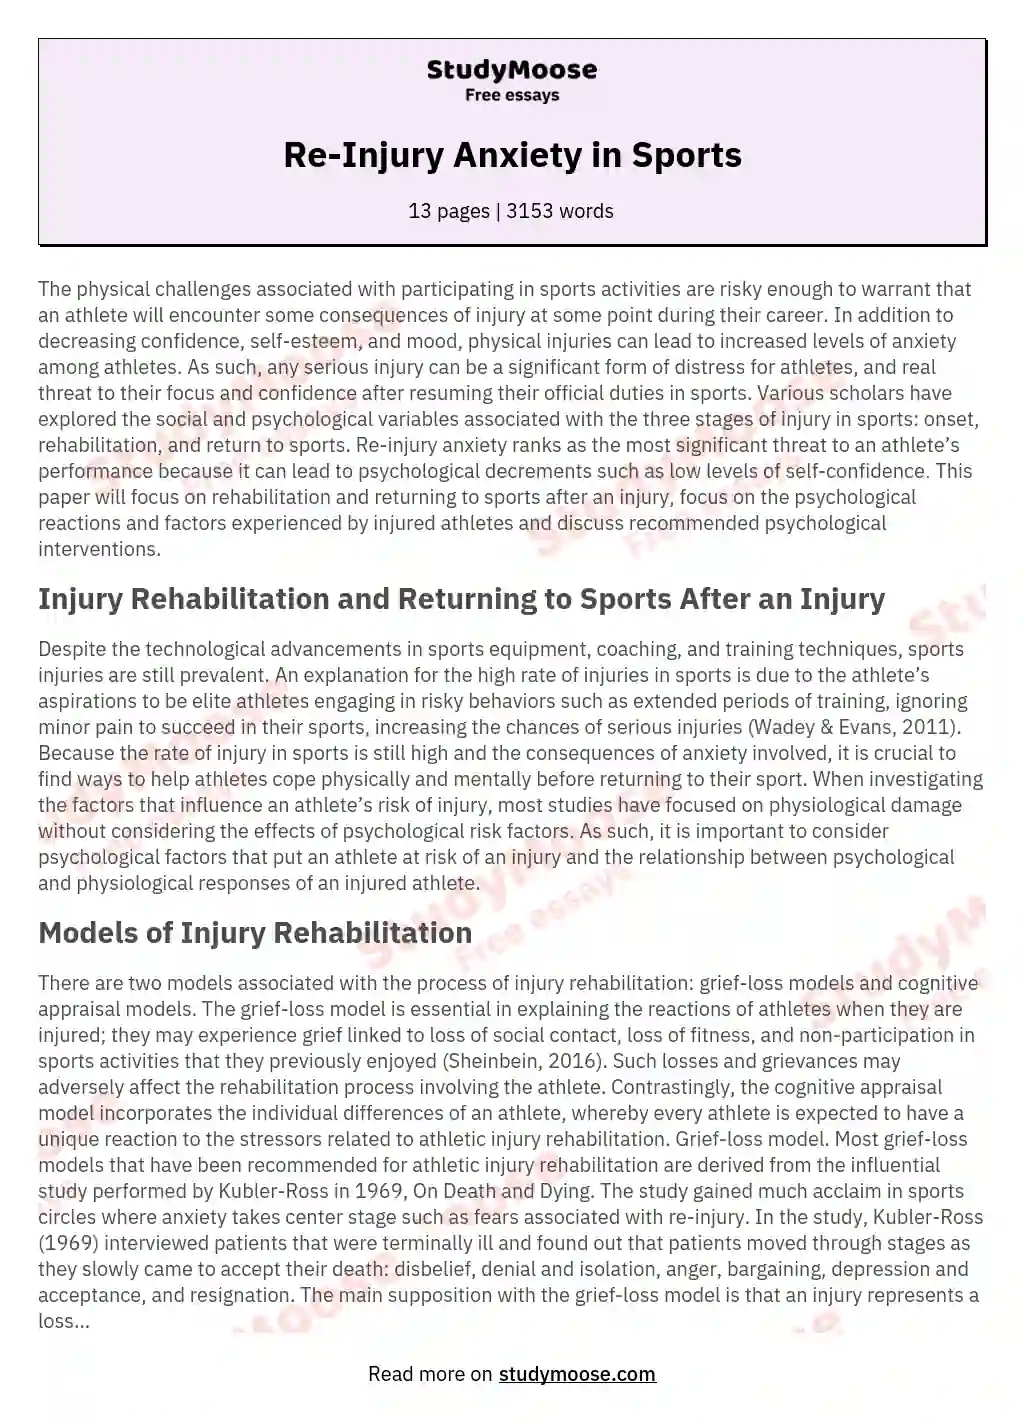 Re-Injury Anxiety in Sports essay